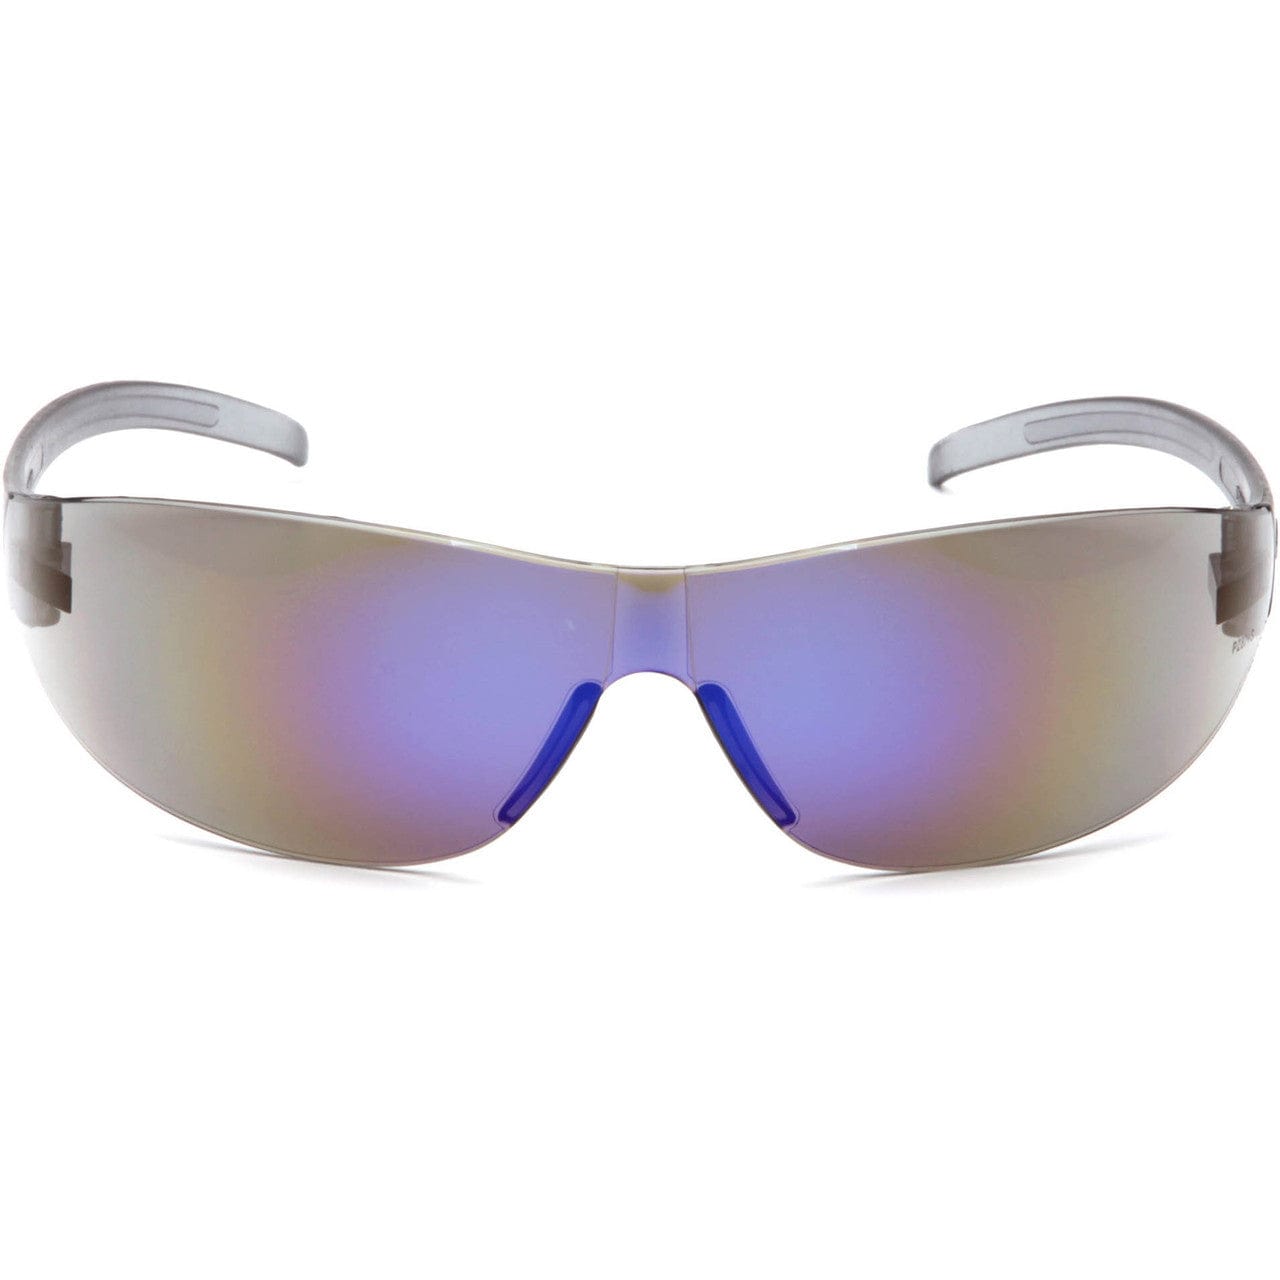 Pyramex Alair Safety Glasses with Blue Mirror Lens S3275S Front View